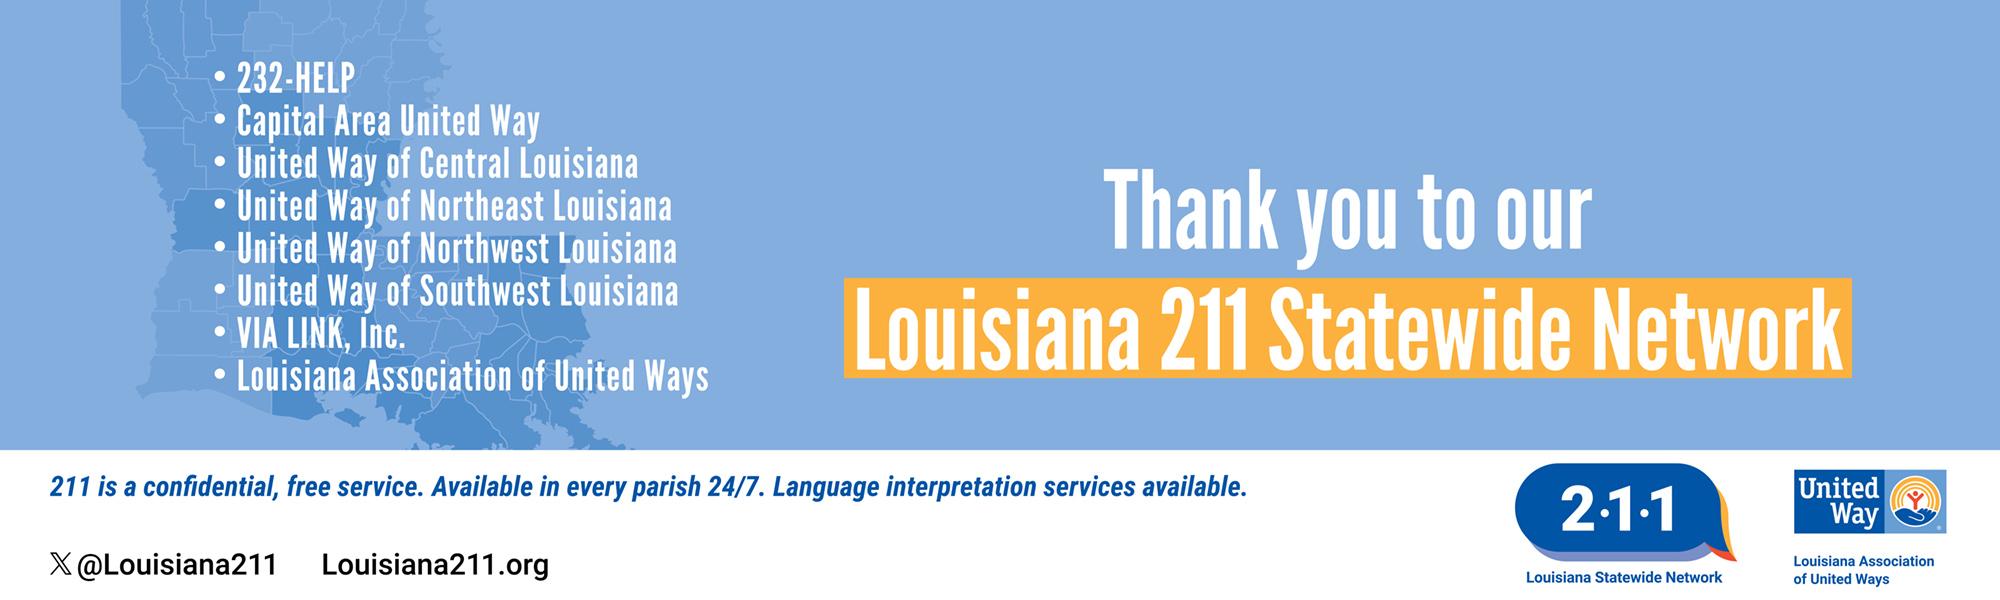 Image of Louisiana with thank you message to Louisiana 211 Statewide Network